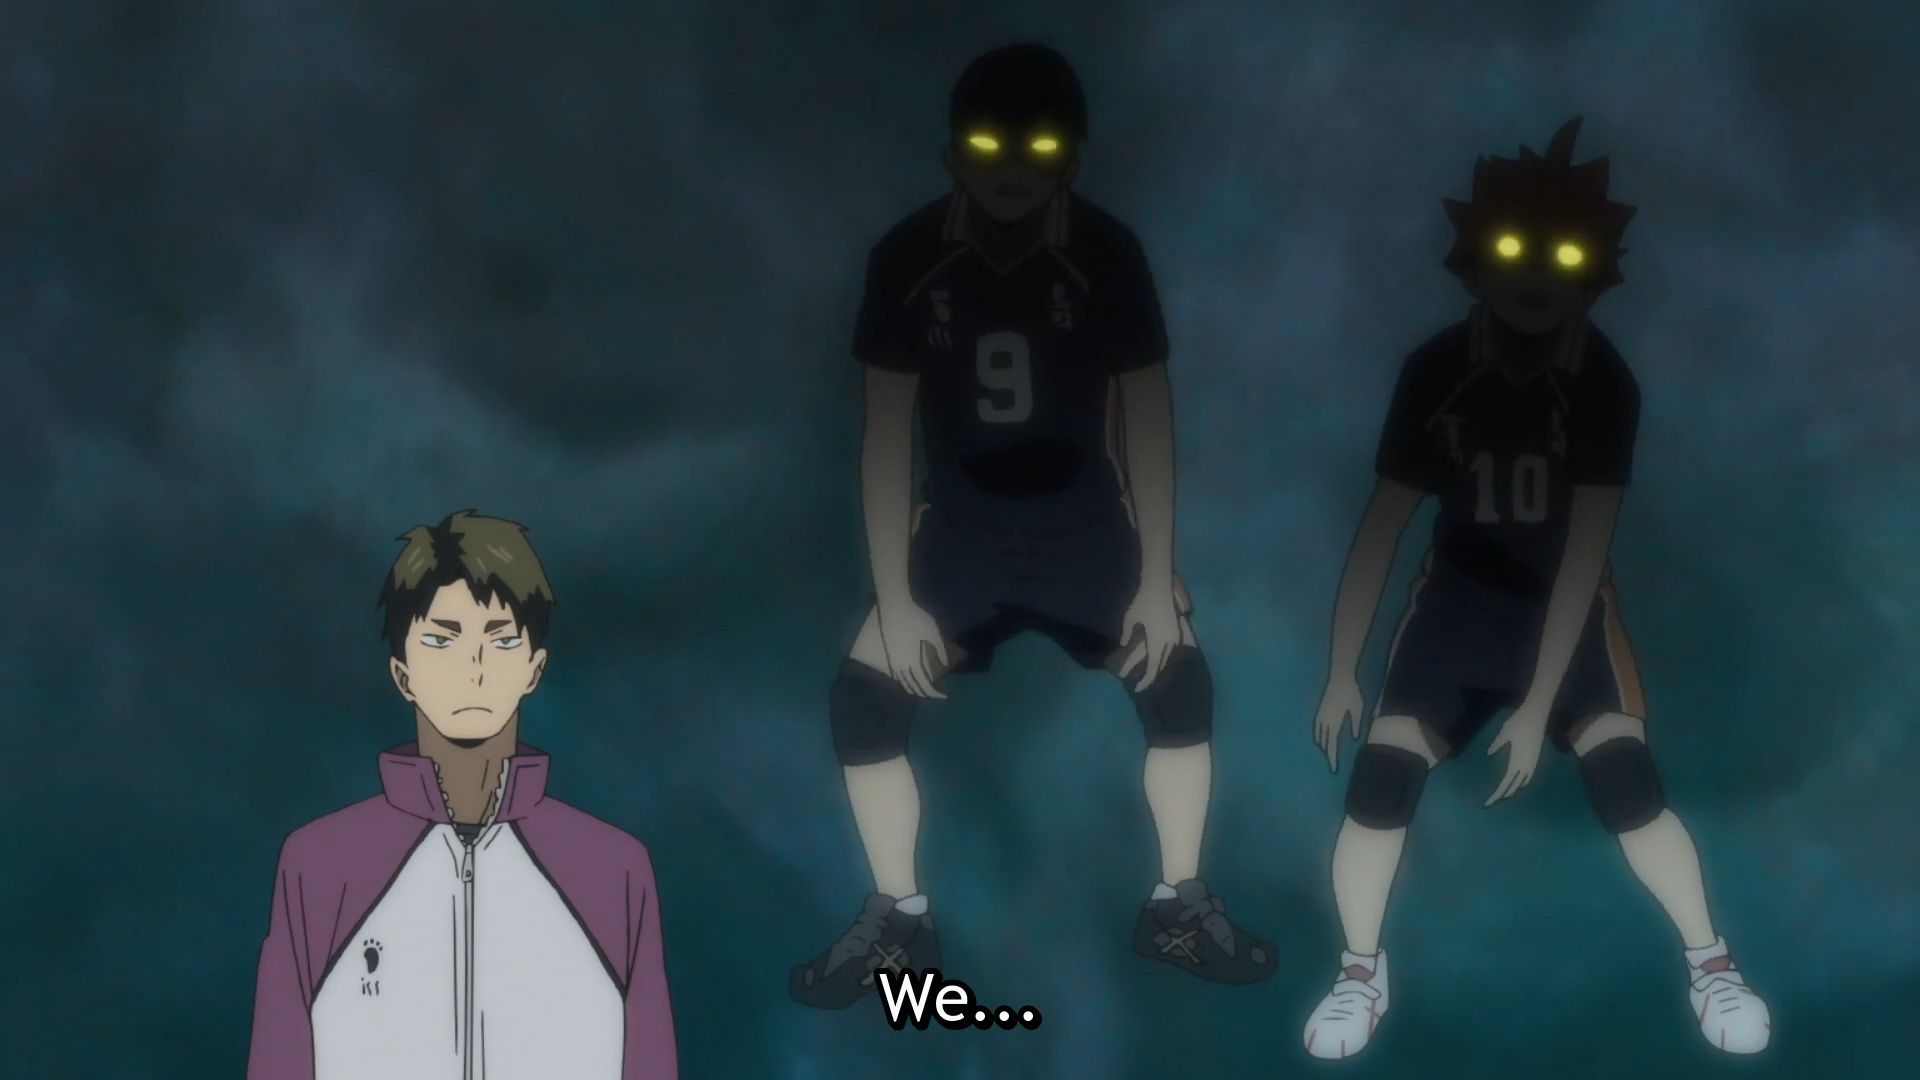 Watch Haikyuu!! Episode 3 Online - The Formidable Ally